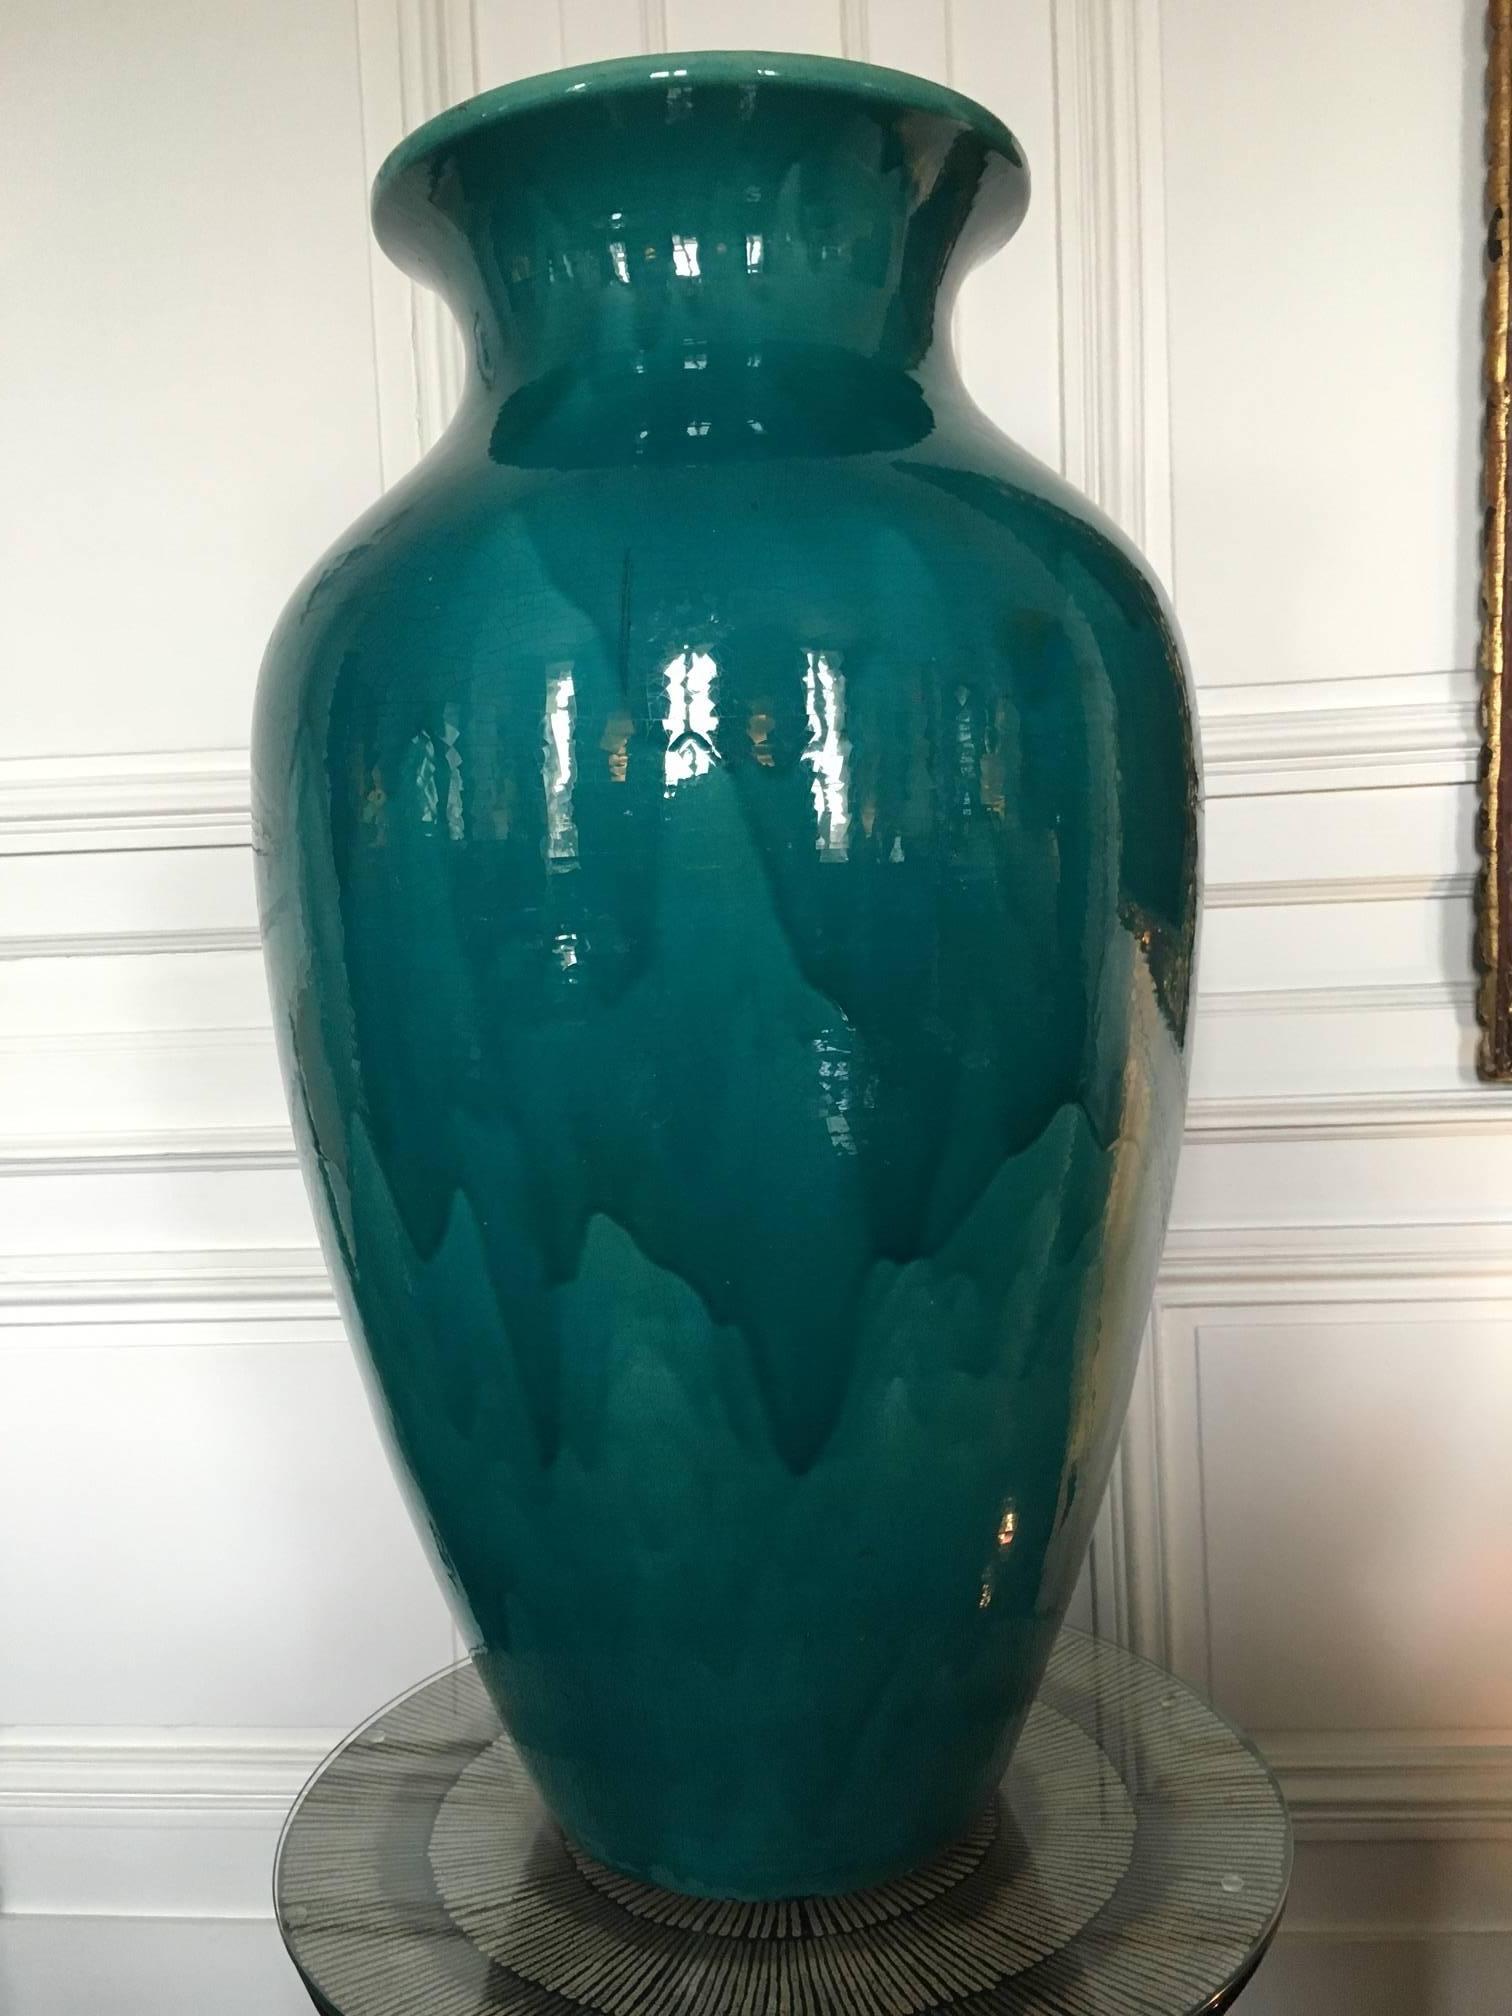 A very unique pair of Vallauris jars circa 1900 coming from the living room of the famous 